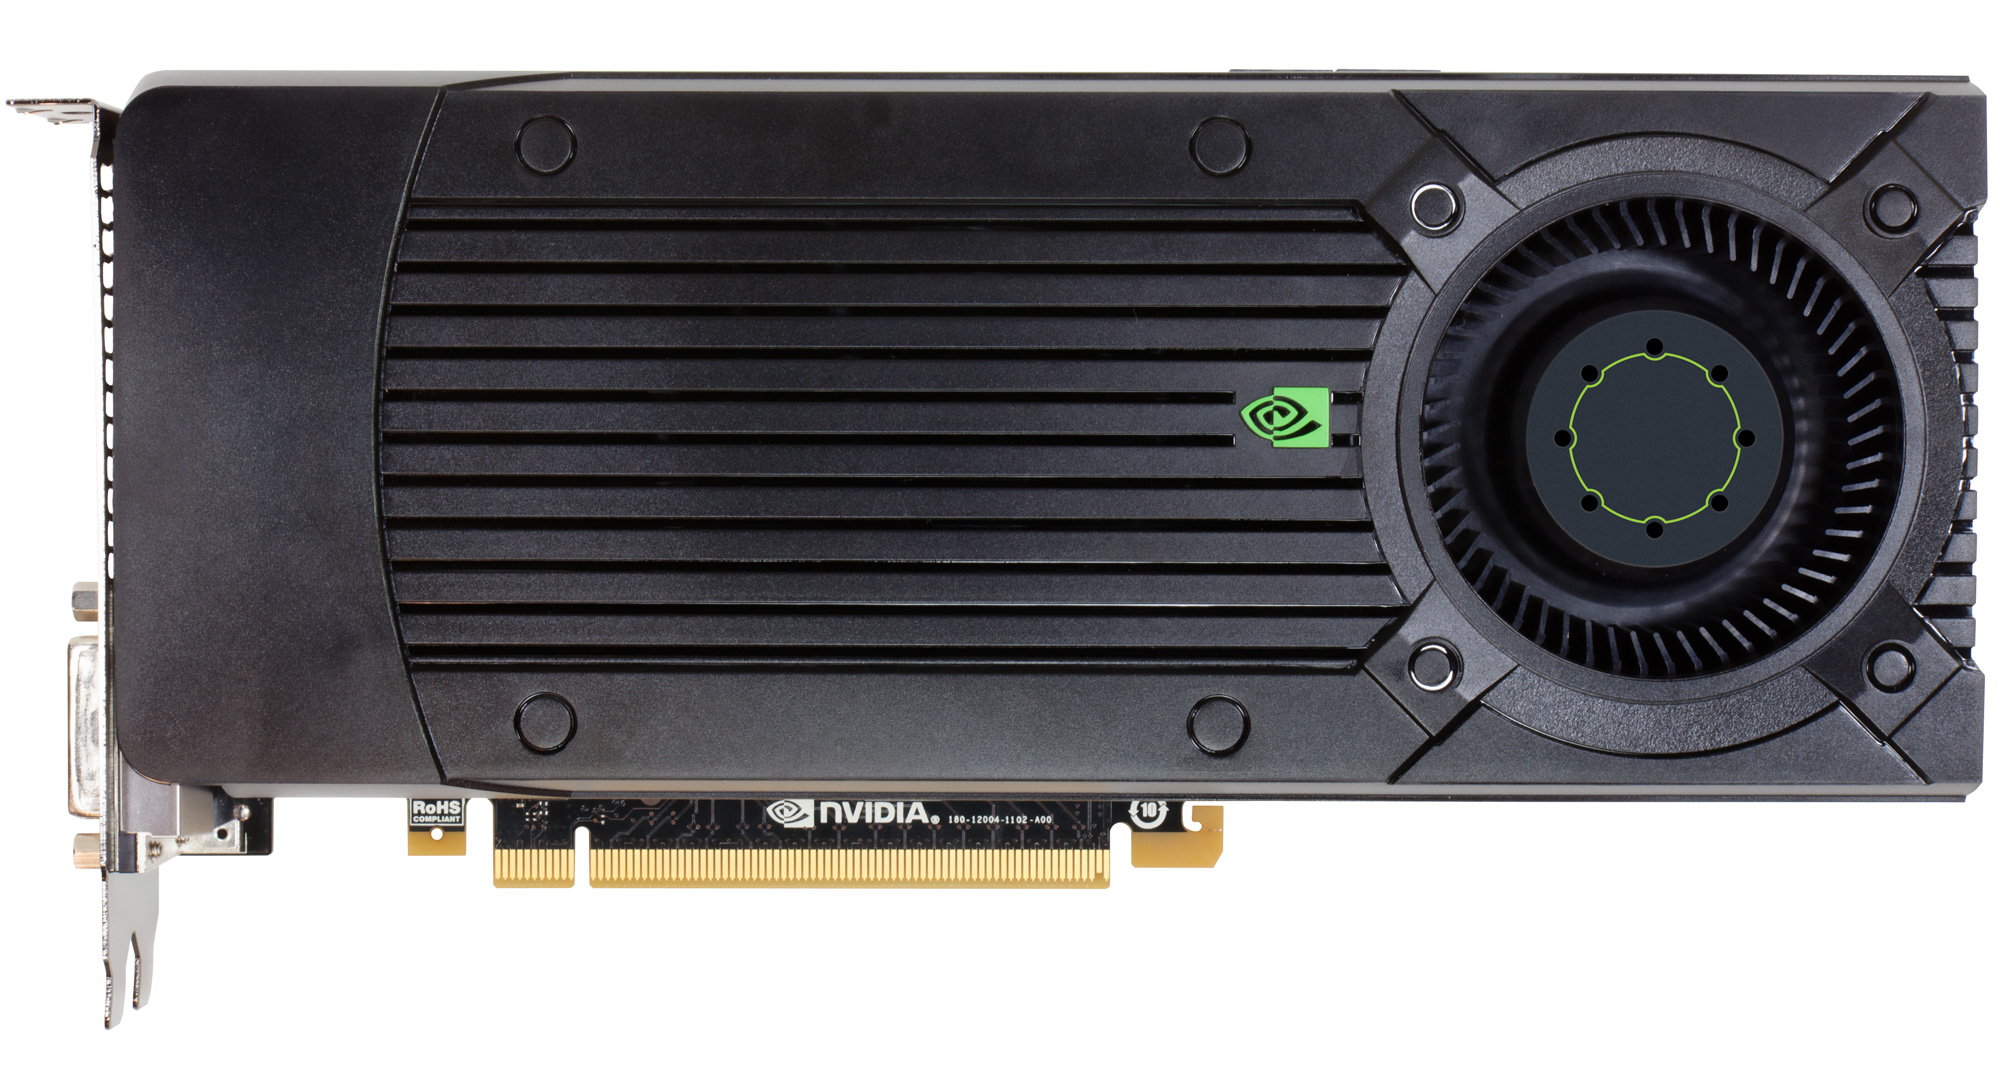 The Test Nvidia Geforce Gtx 650 Ti Boost Review Bringing Balance To The Force